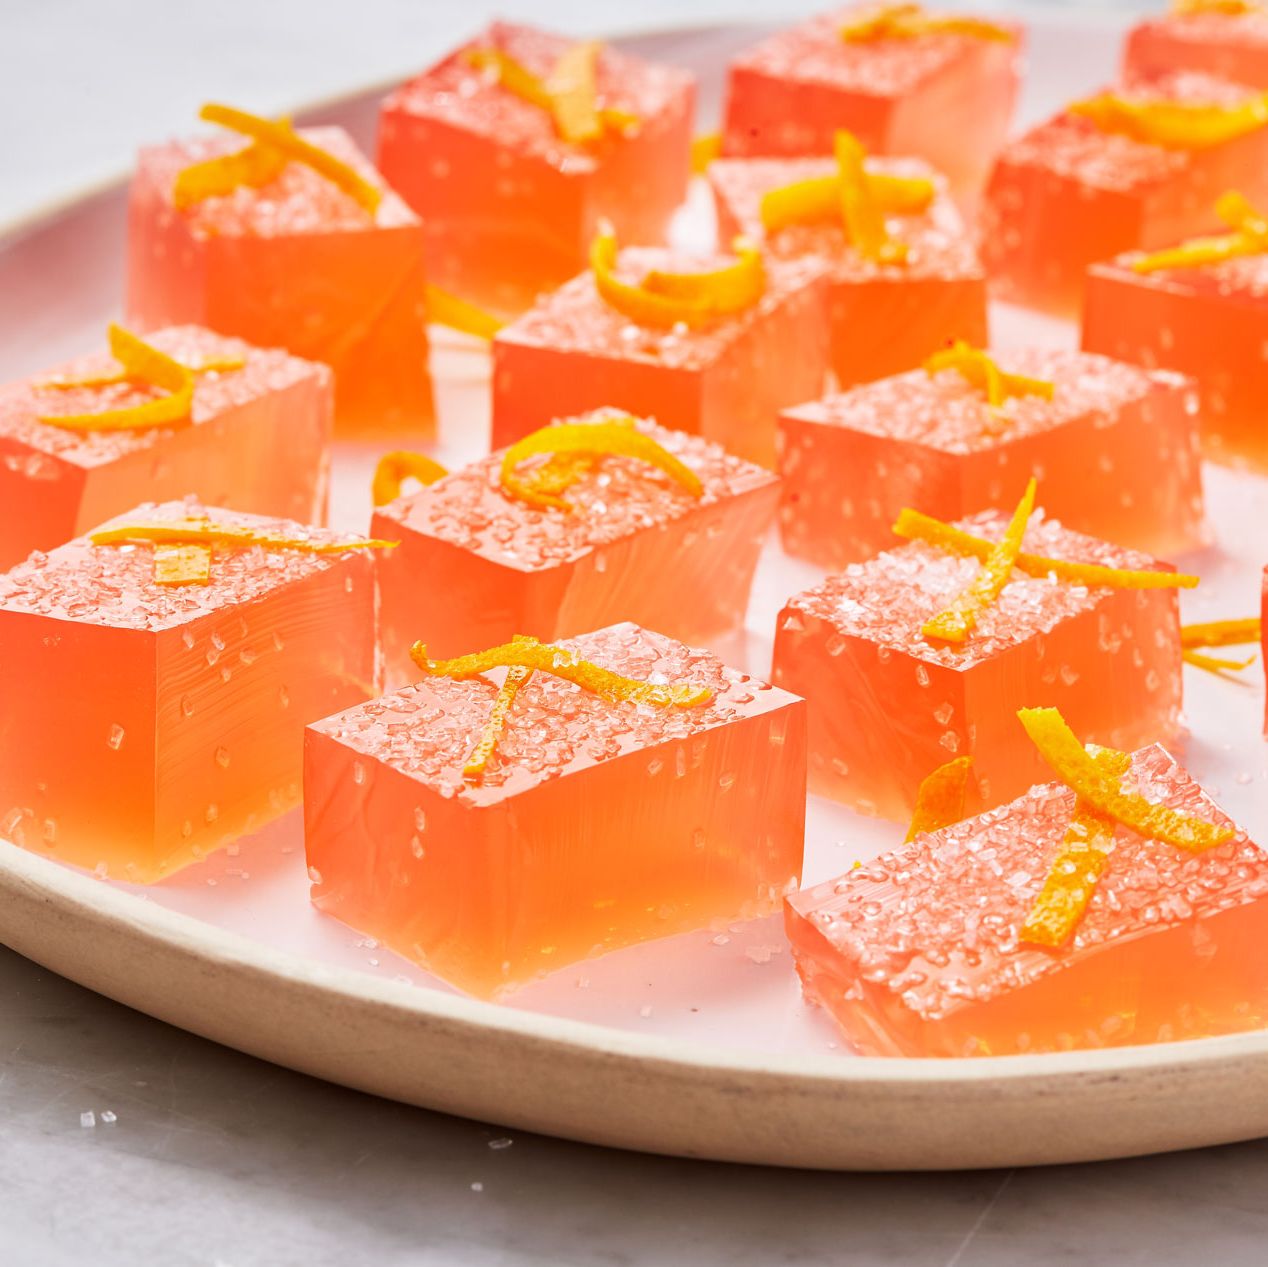 Negroni Jell-O Shots = The Classiest Way To Party